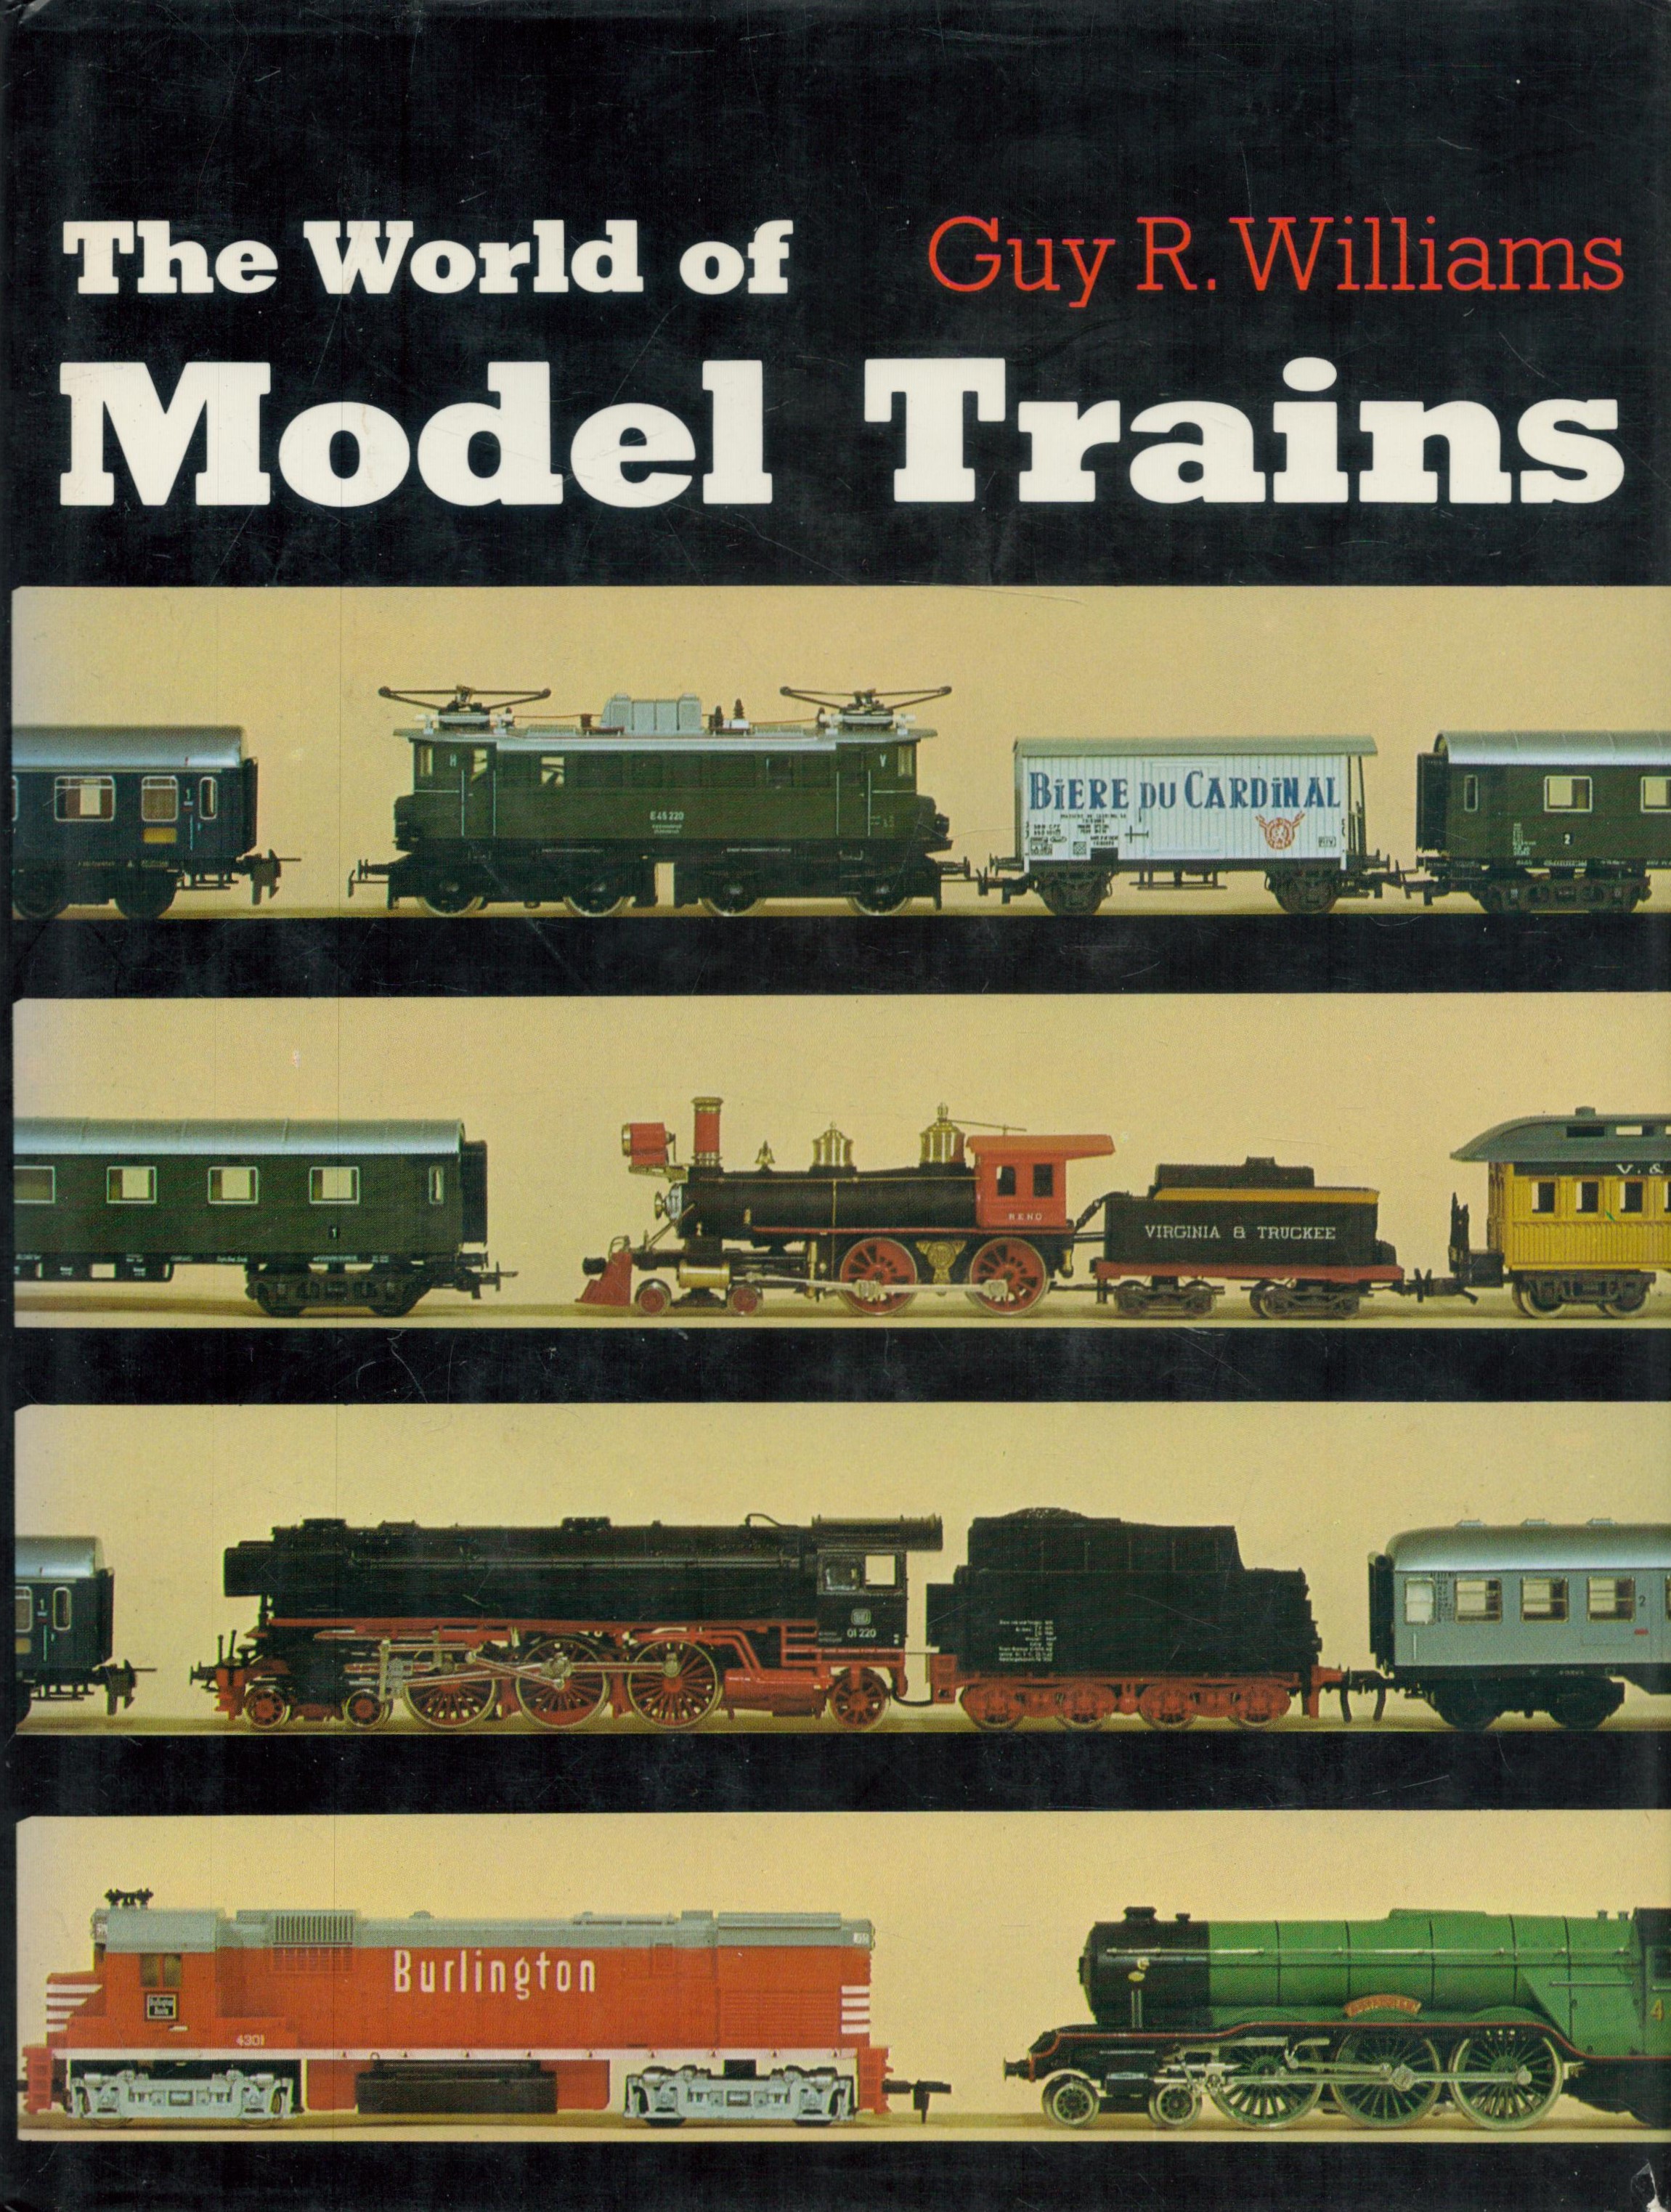 The World of Model Trains by Guy R Williams 1981 hardback book with 256 pages small tear to outer